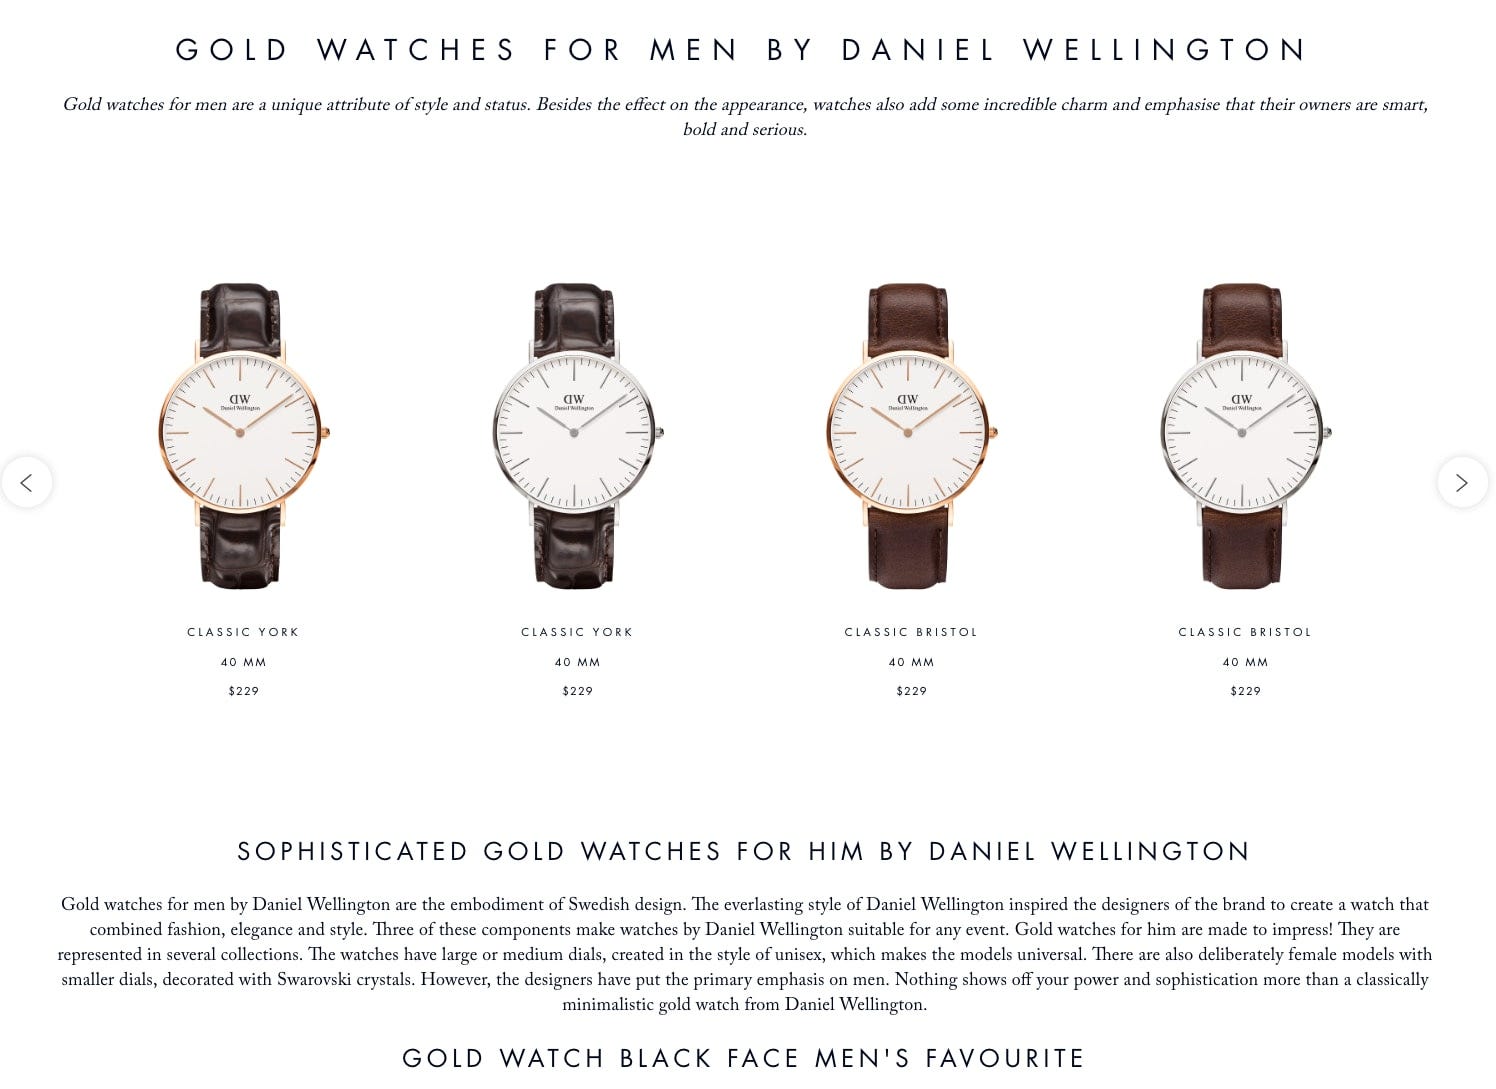 How Daniel Wellington Built A $228 Fashion Empire With A Tiny $30k Investment [Detailed Case Study] | by Max Andersson | Medium